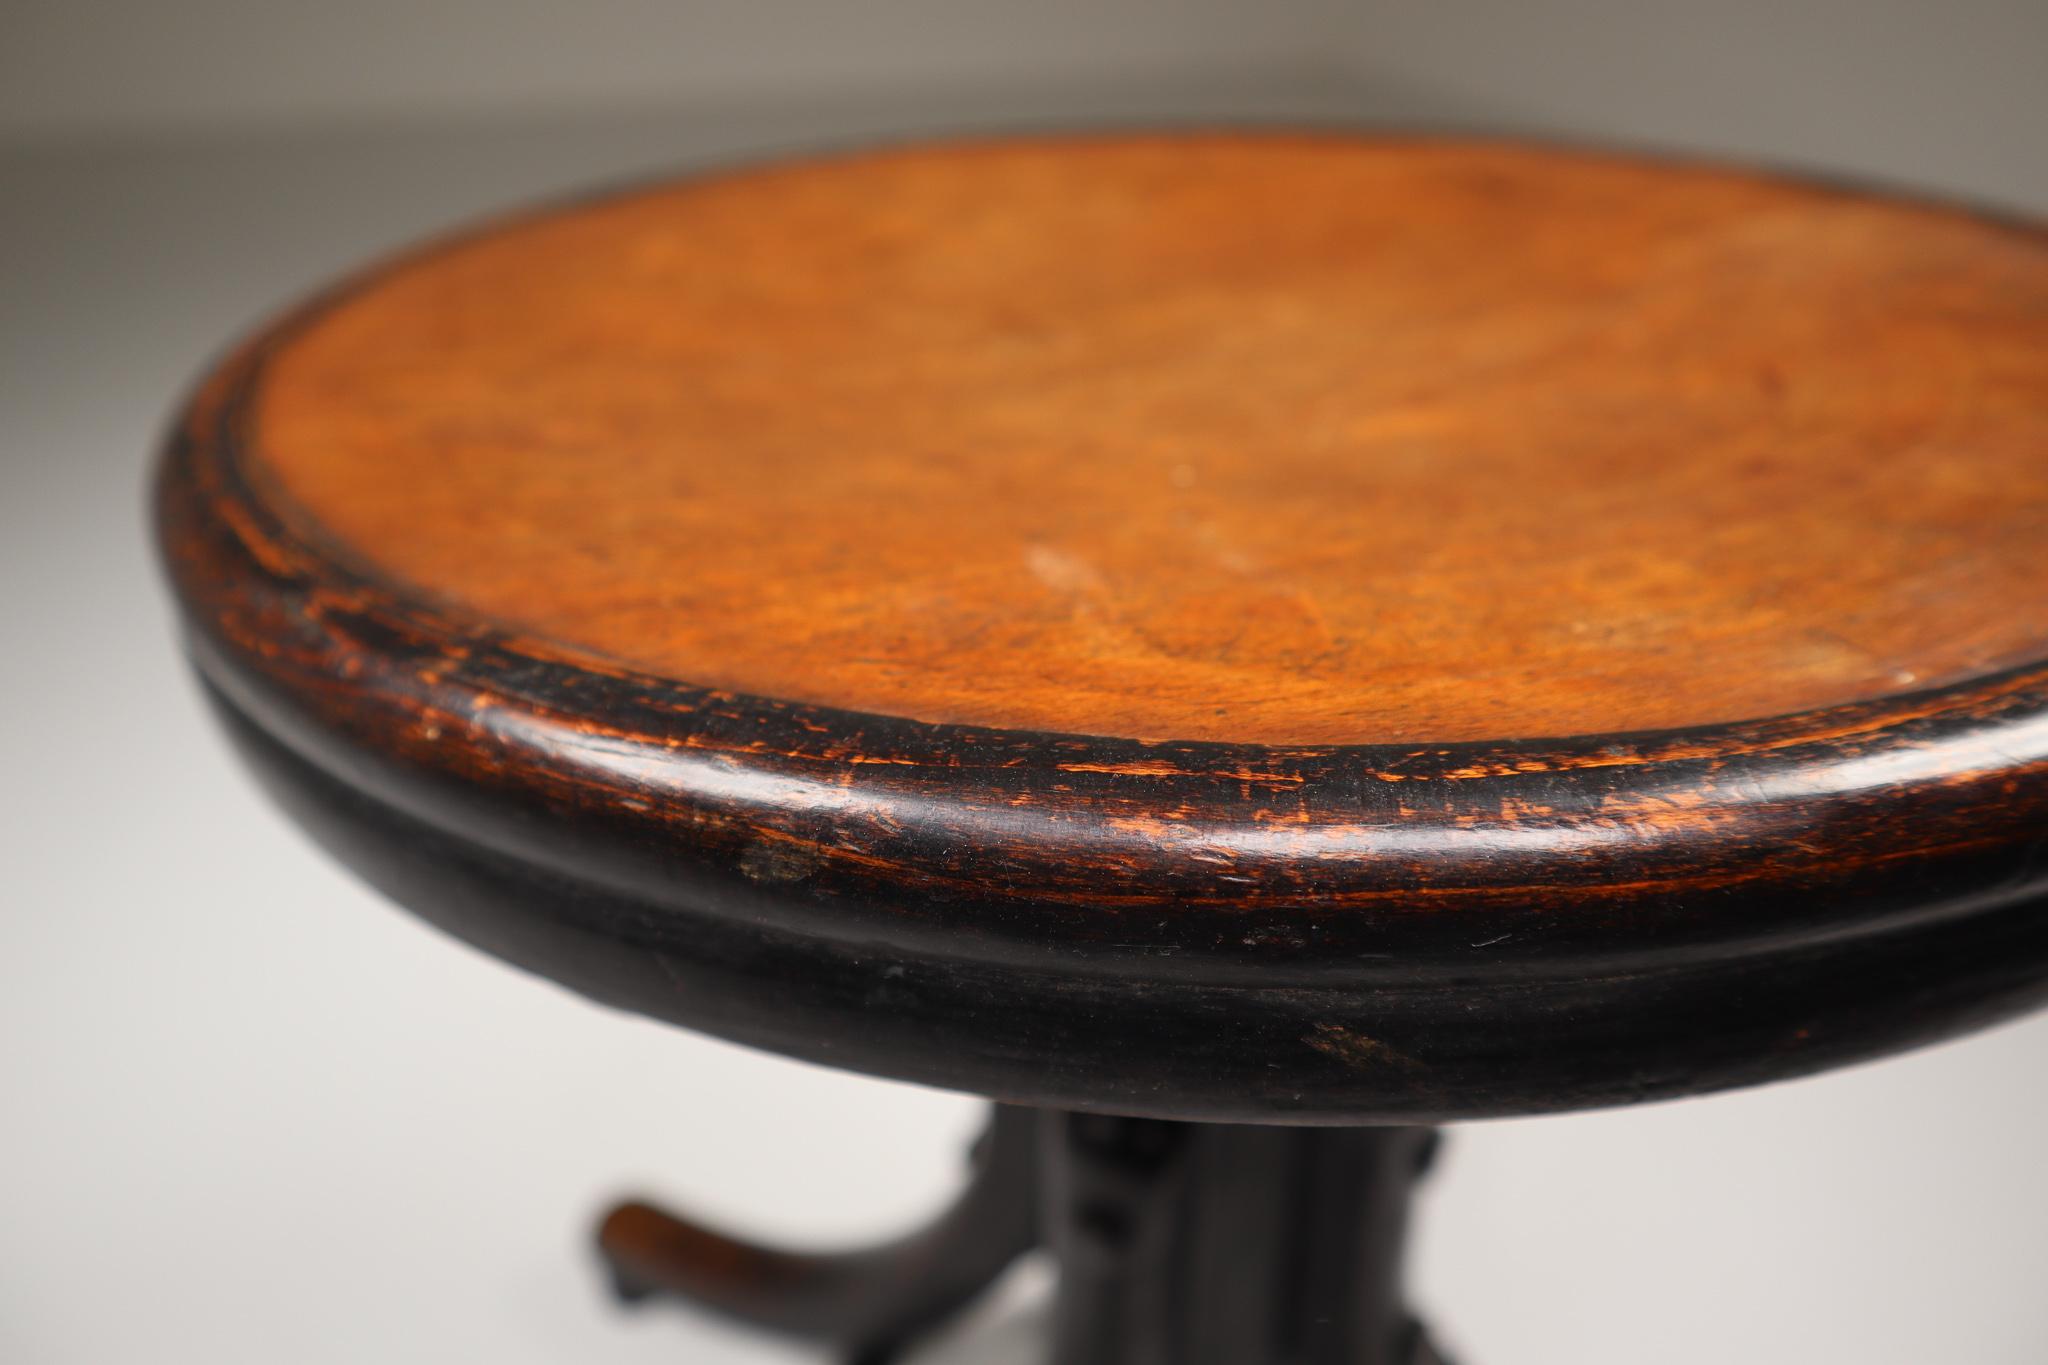 Vienna Secession Patinated Bentwood Piano Stool by Thonet, Austria, 1900s